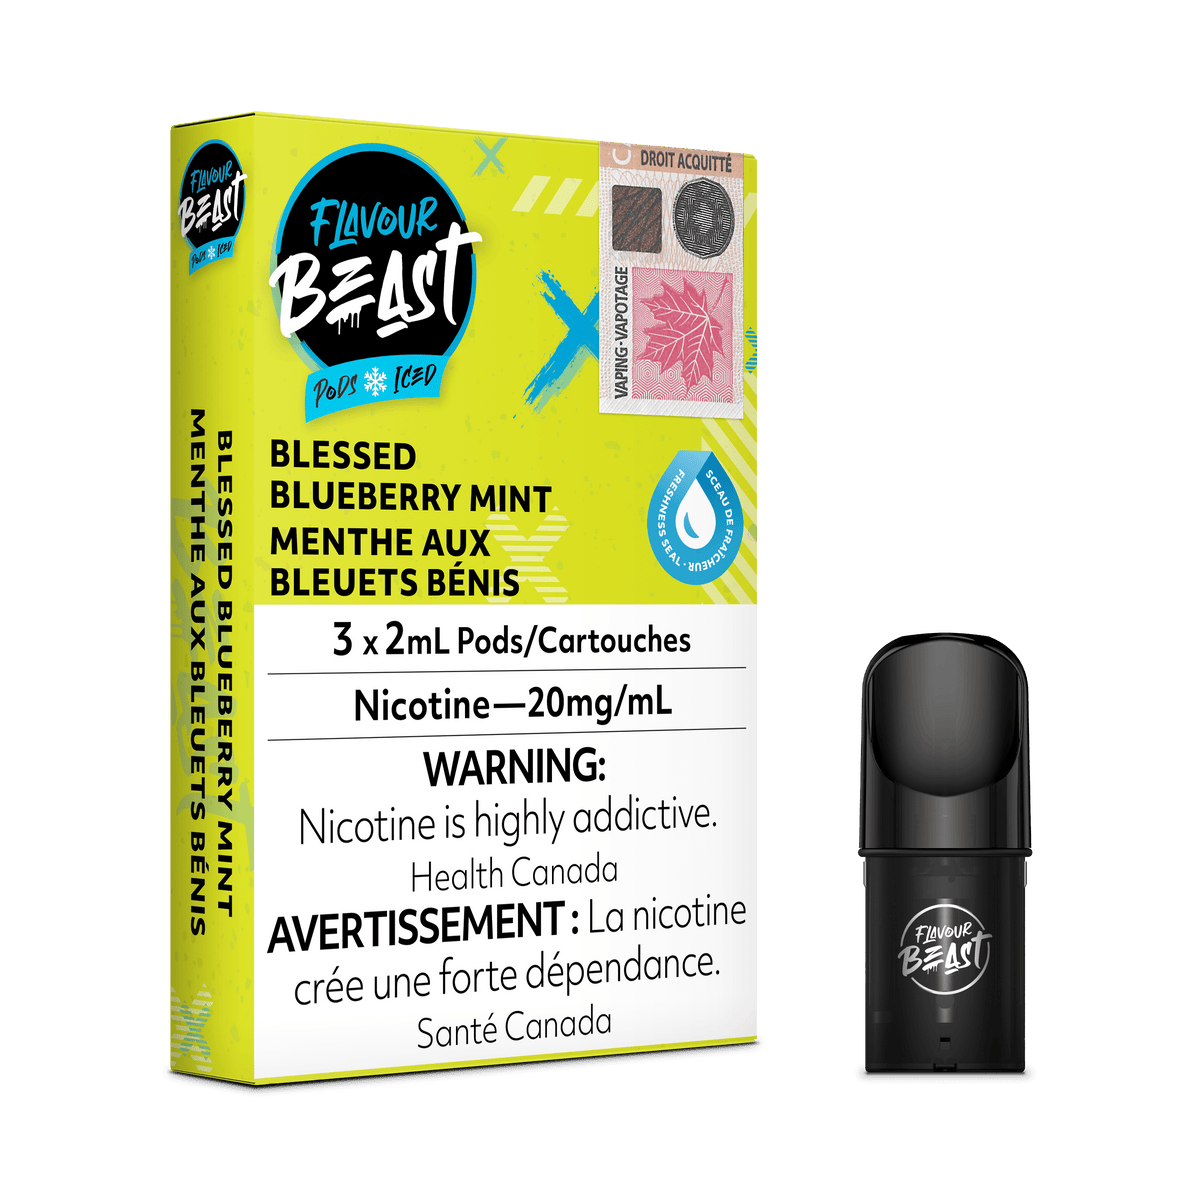 Flavour Beast Vape Pod - Blessed Blueberry Mint Iced available on Canada online vape shop